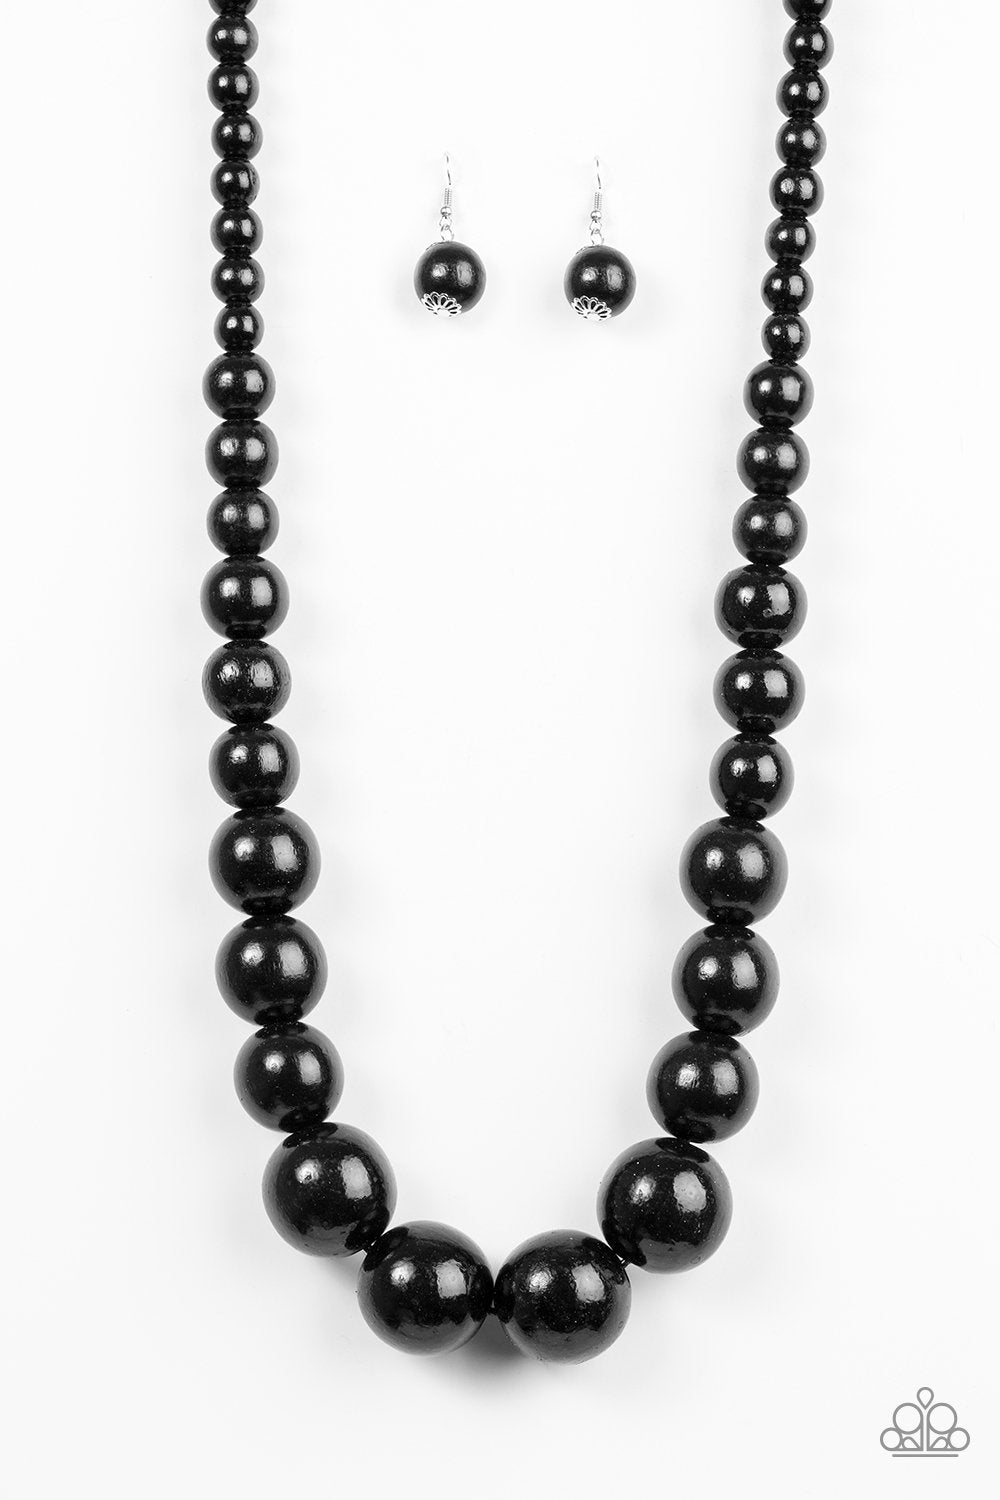 Effortlessly Everglades Black Wood Necklace and matching Earrings - Paparazzi Accessories-CarasShop.com - $5 Jewelry by Cara Jewels